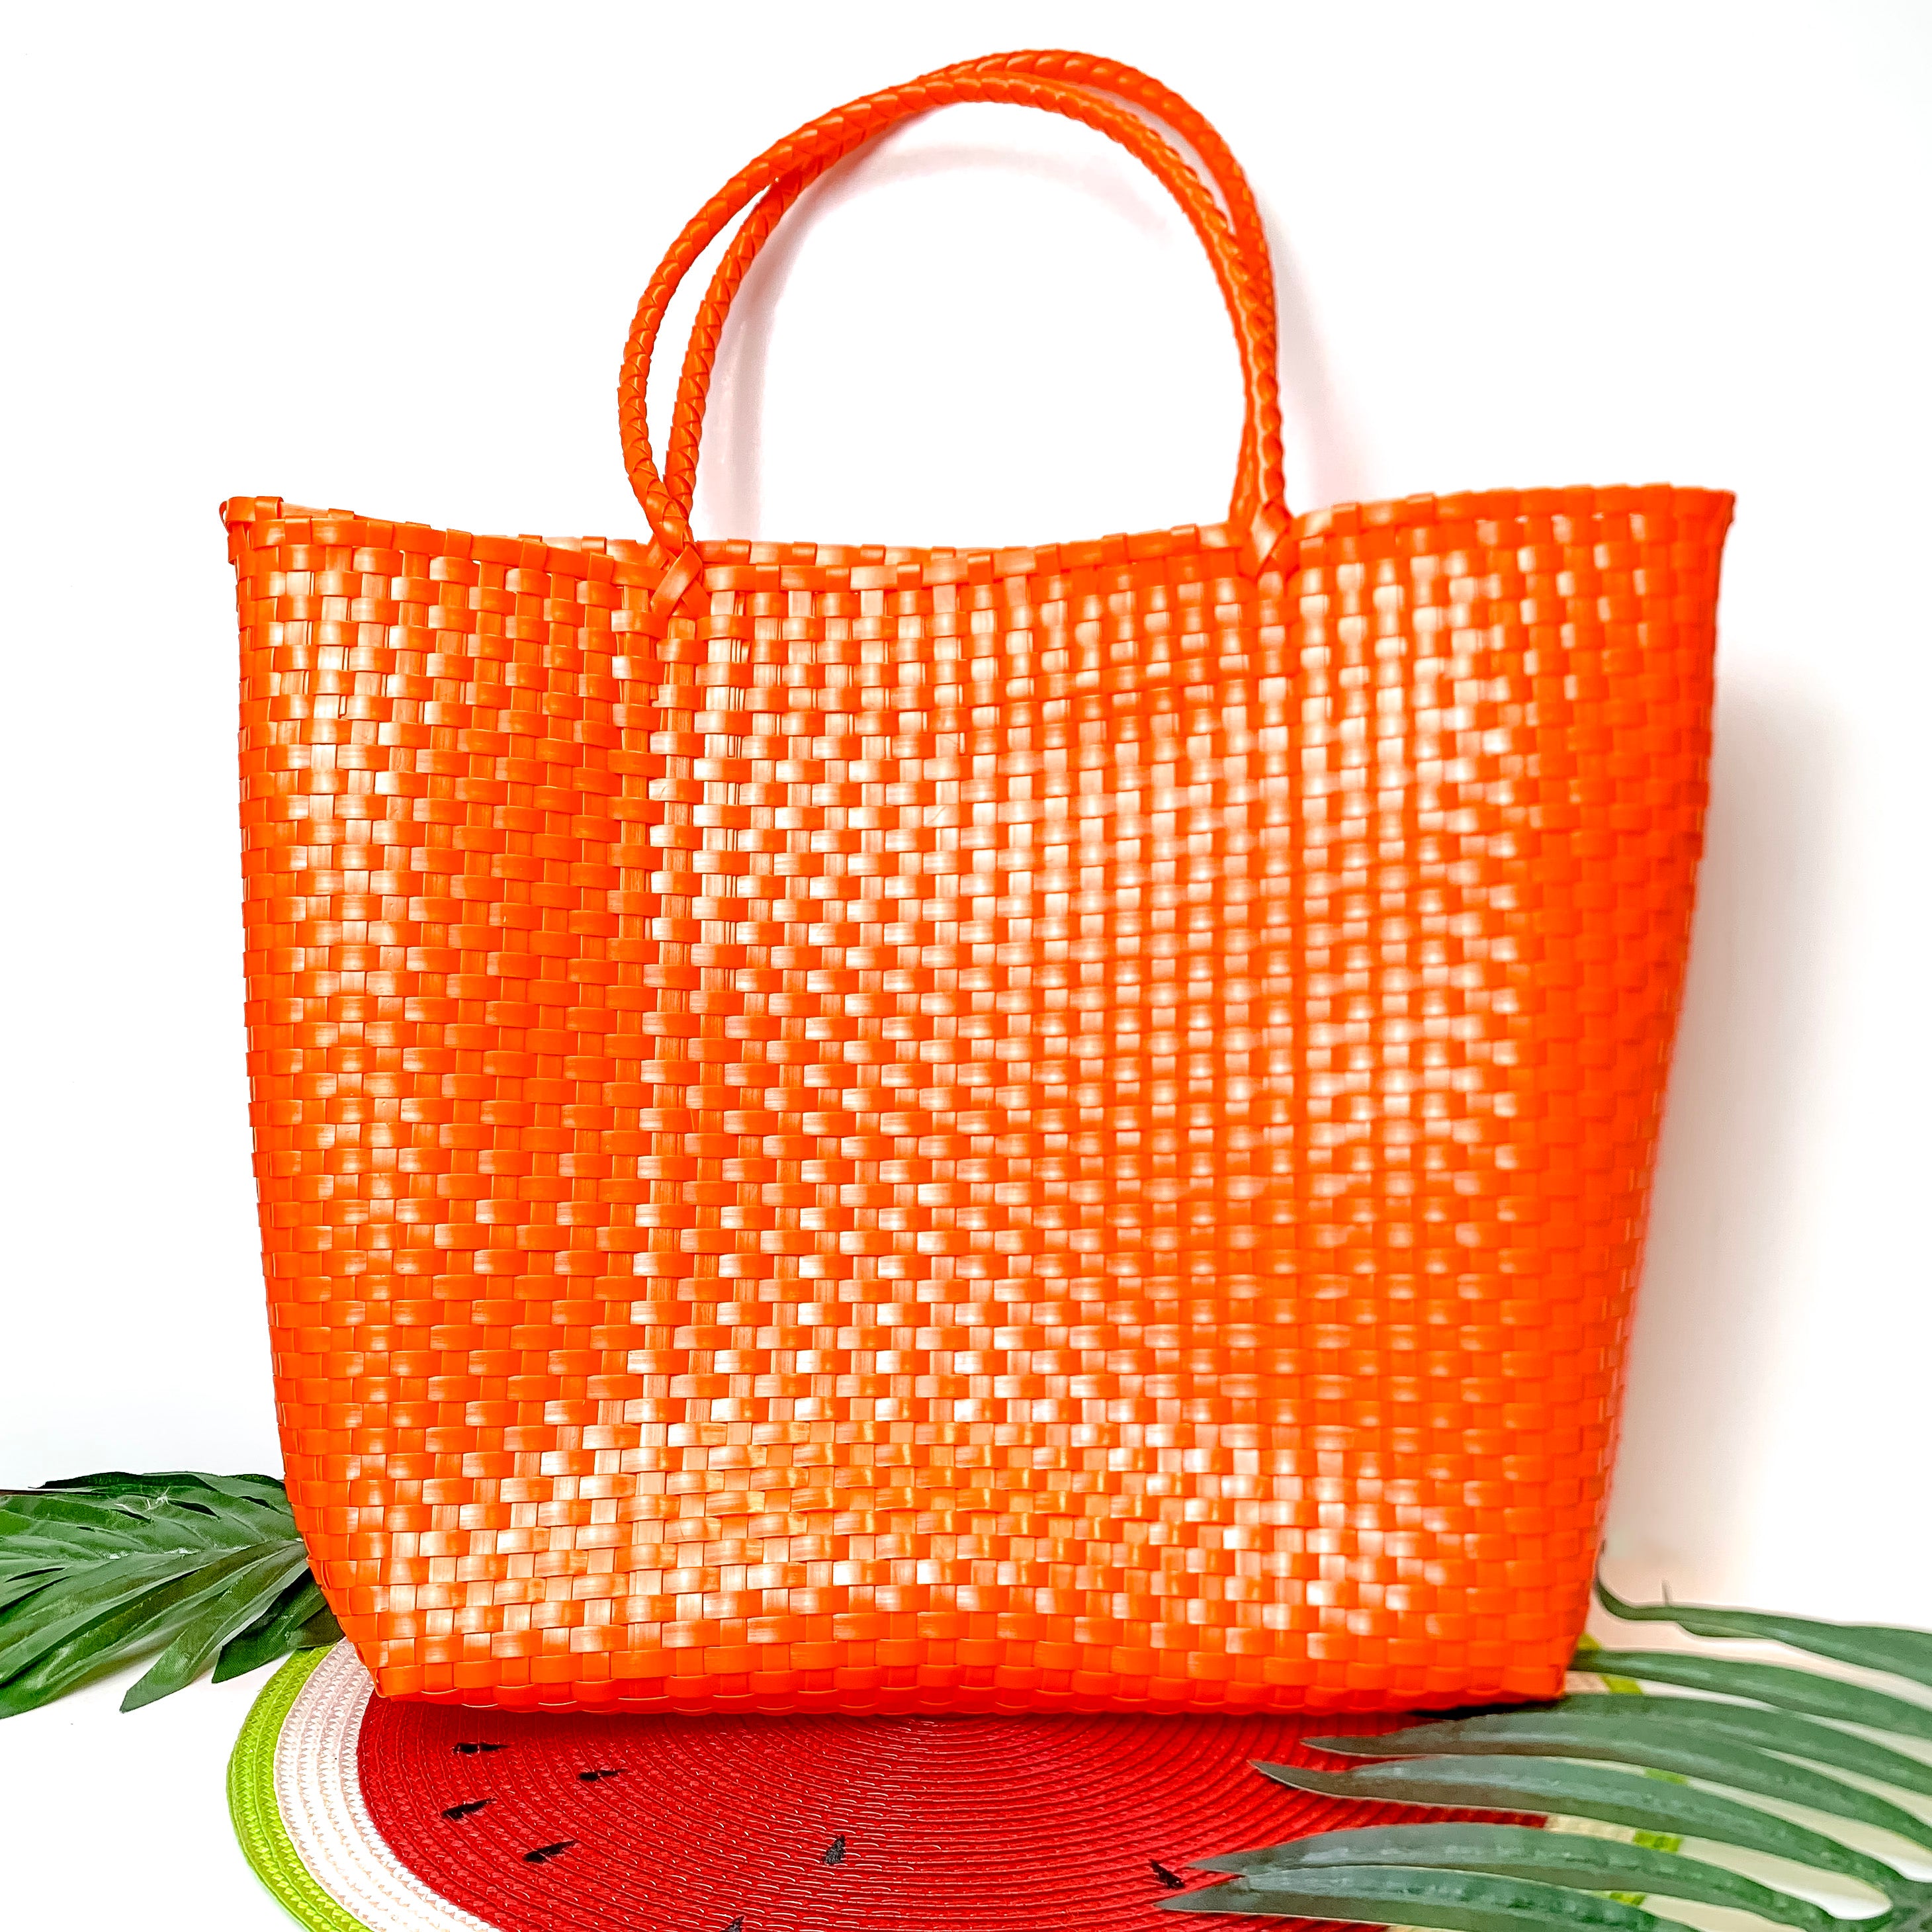 Coastal Couture Carryall Tote Bag in Orange - Giddy Up Glamour Boutique